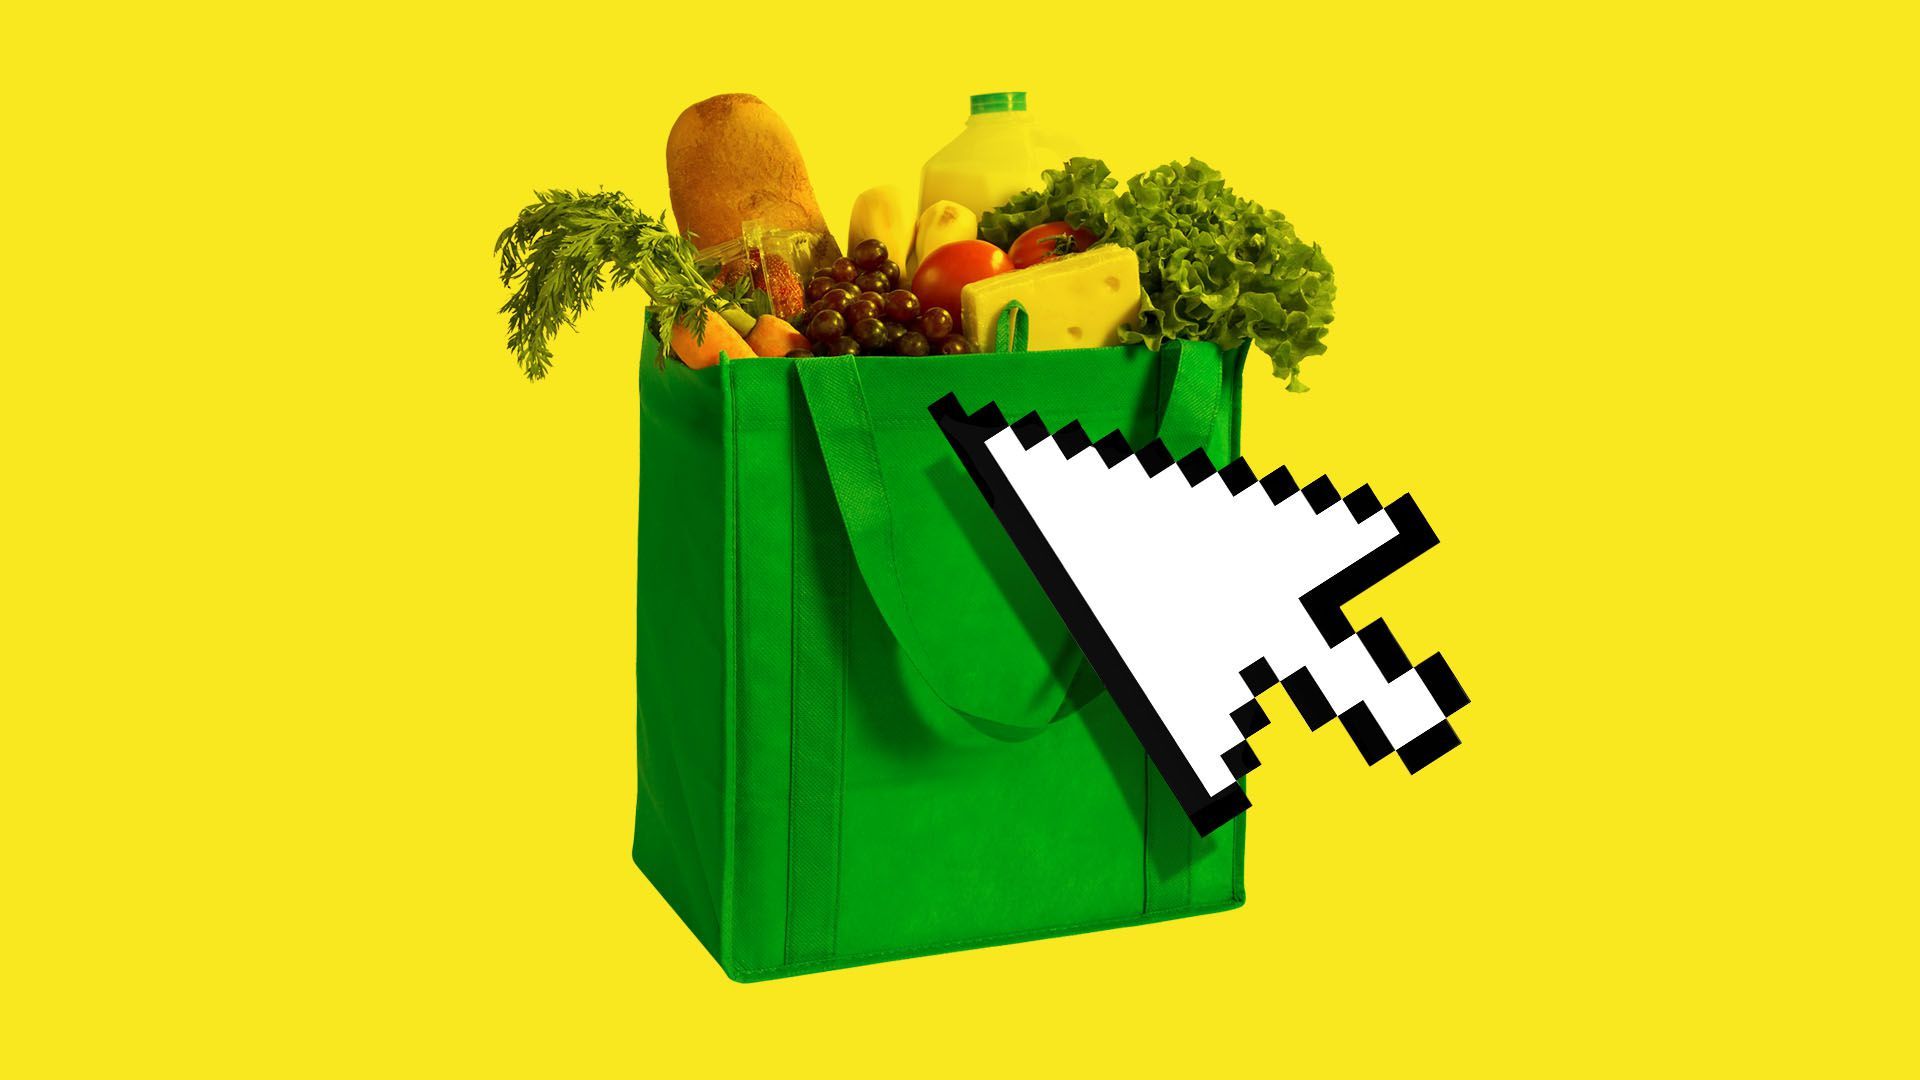 In this illustration, a giant computer mouse clicks on a reusable grocery bag.